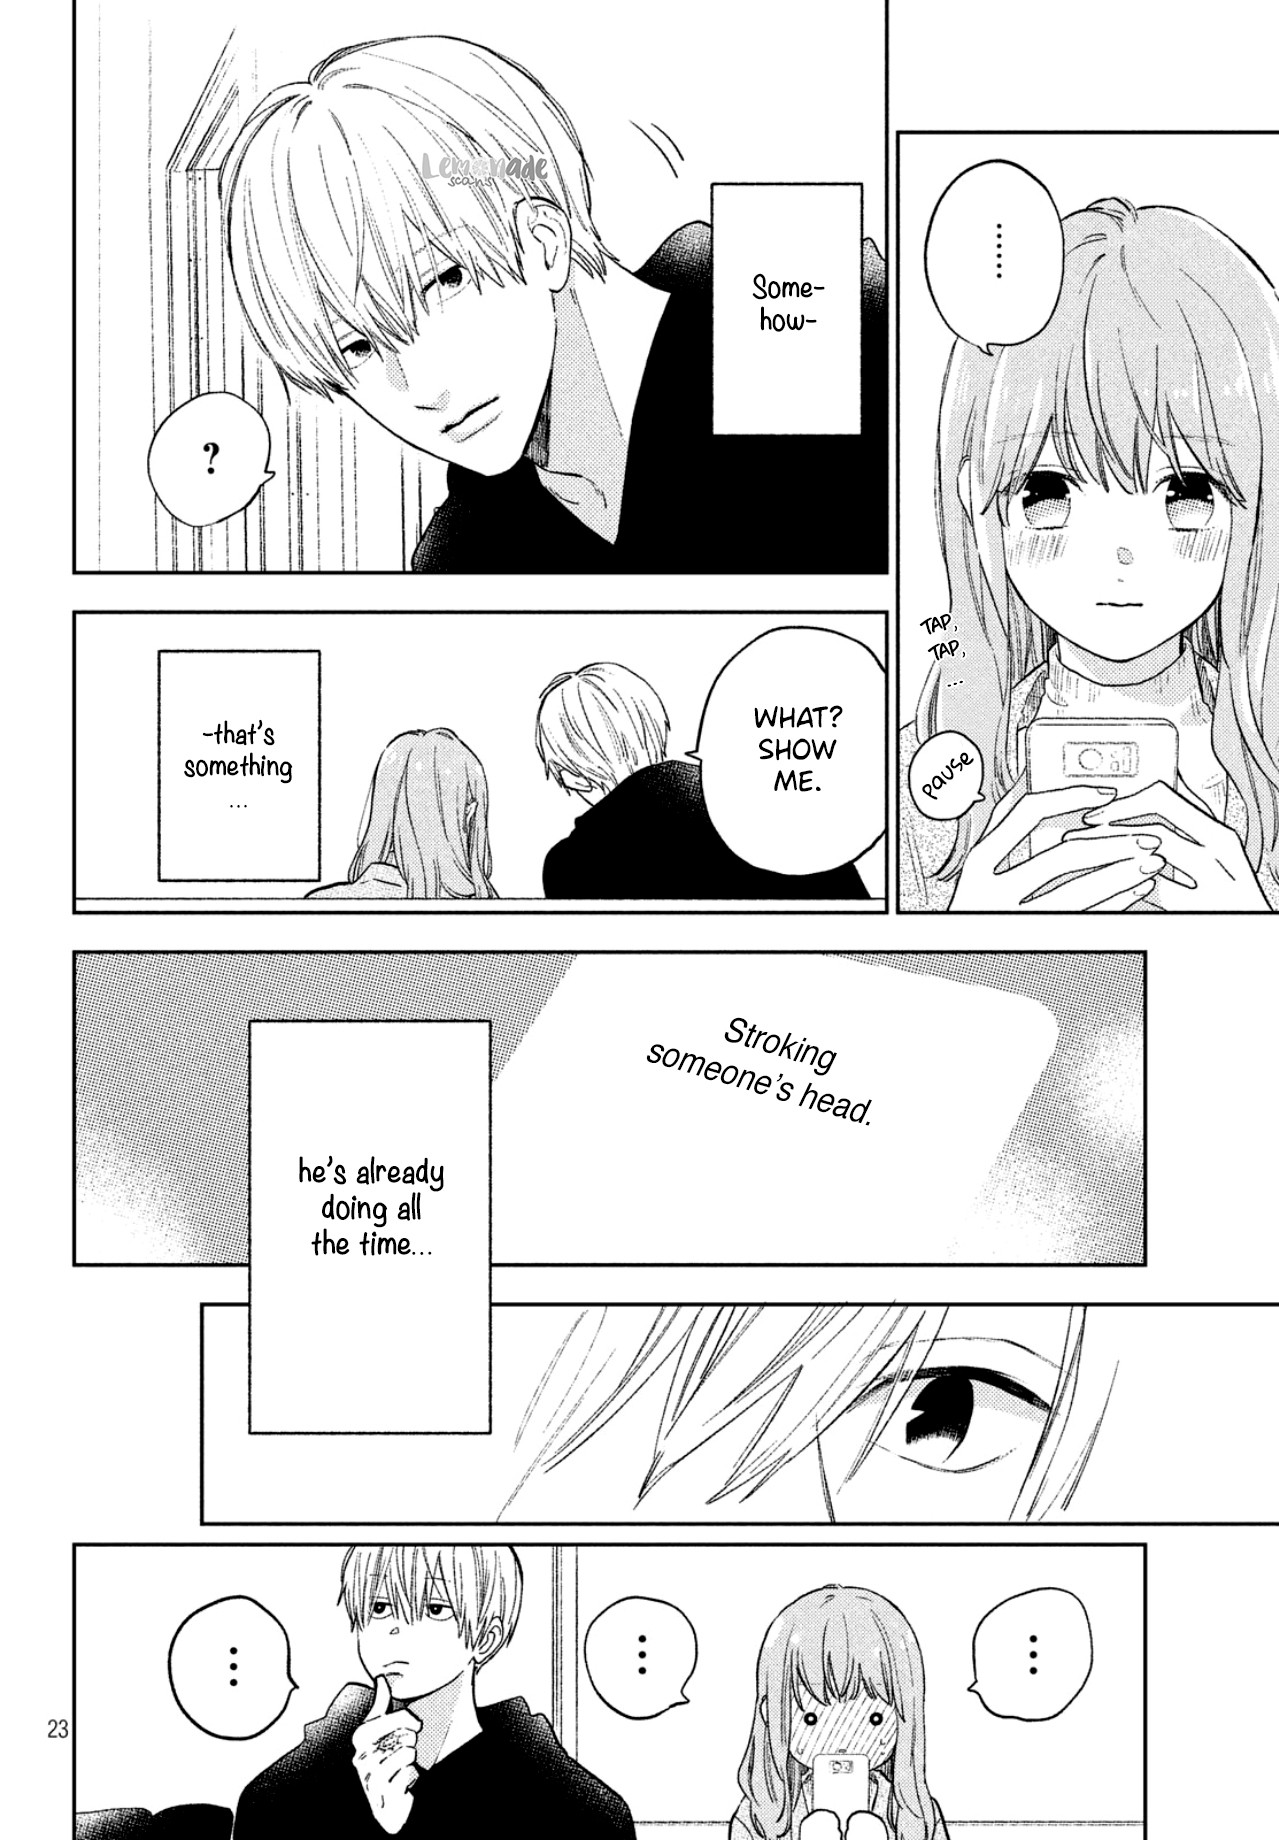 A Sign of Affection Vol.1 Ch.4